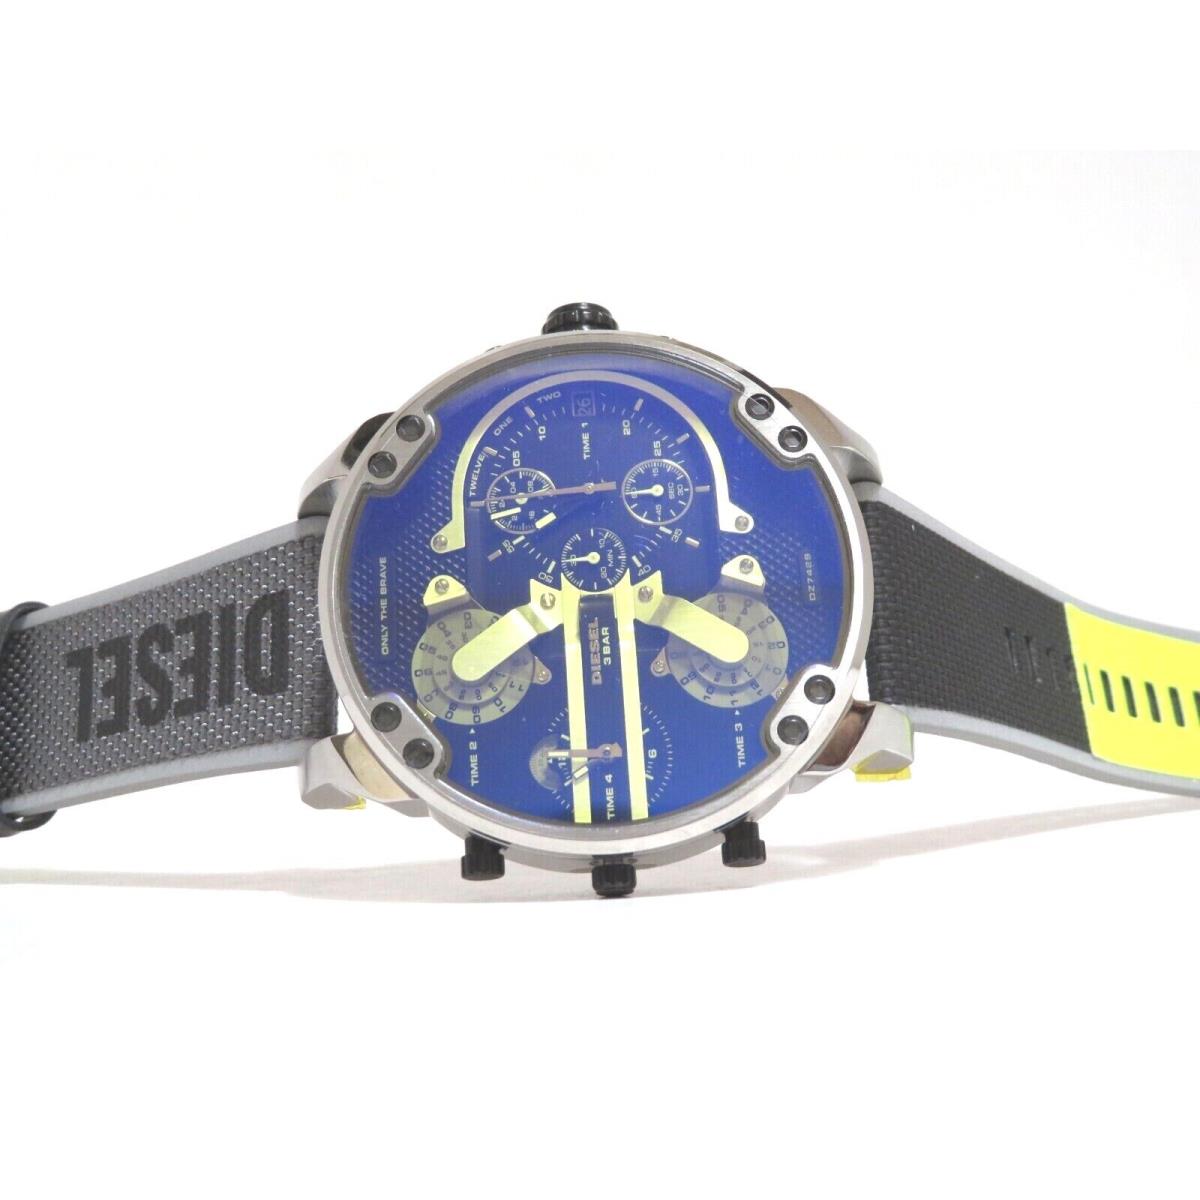 Diesel watch Daddy - Multi color crystal, iridescent blue and yellows Dial, has accent lime color on back, see photo Band, Black and stainless Bezel 1